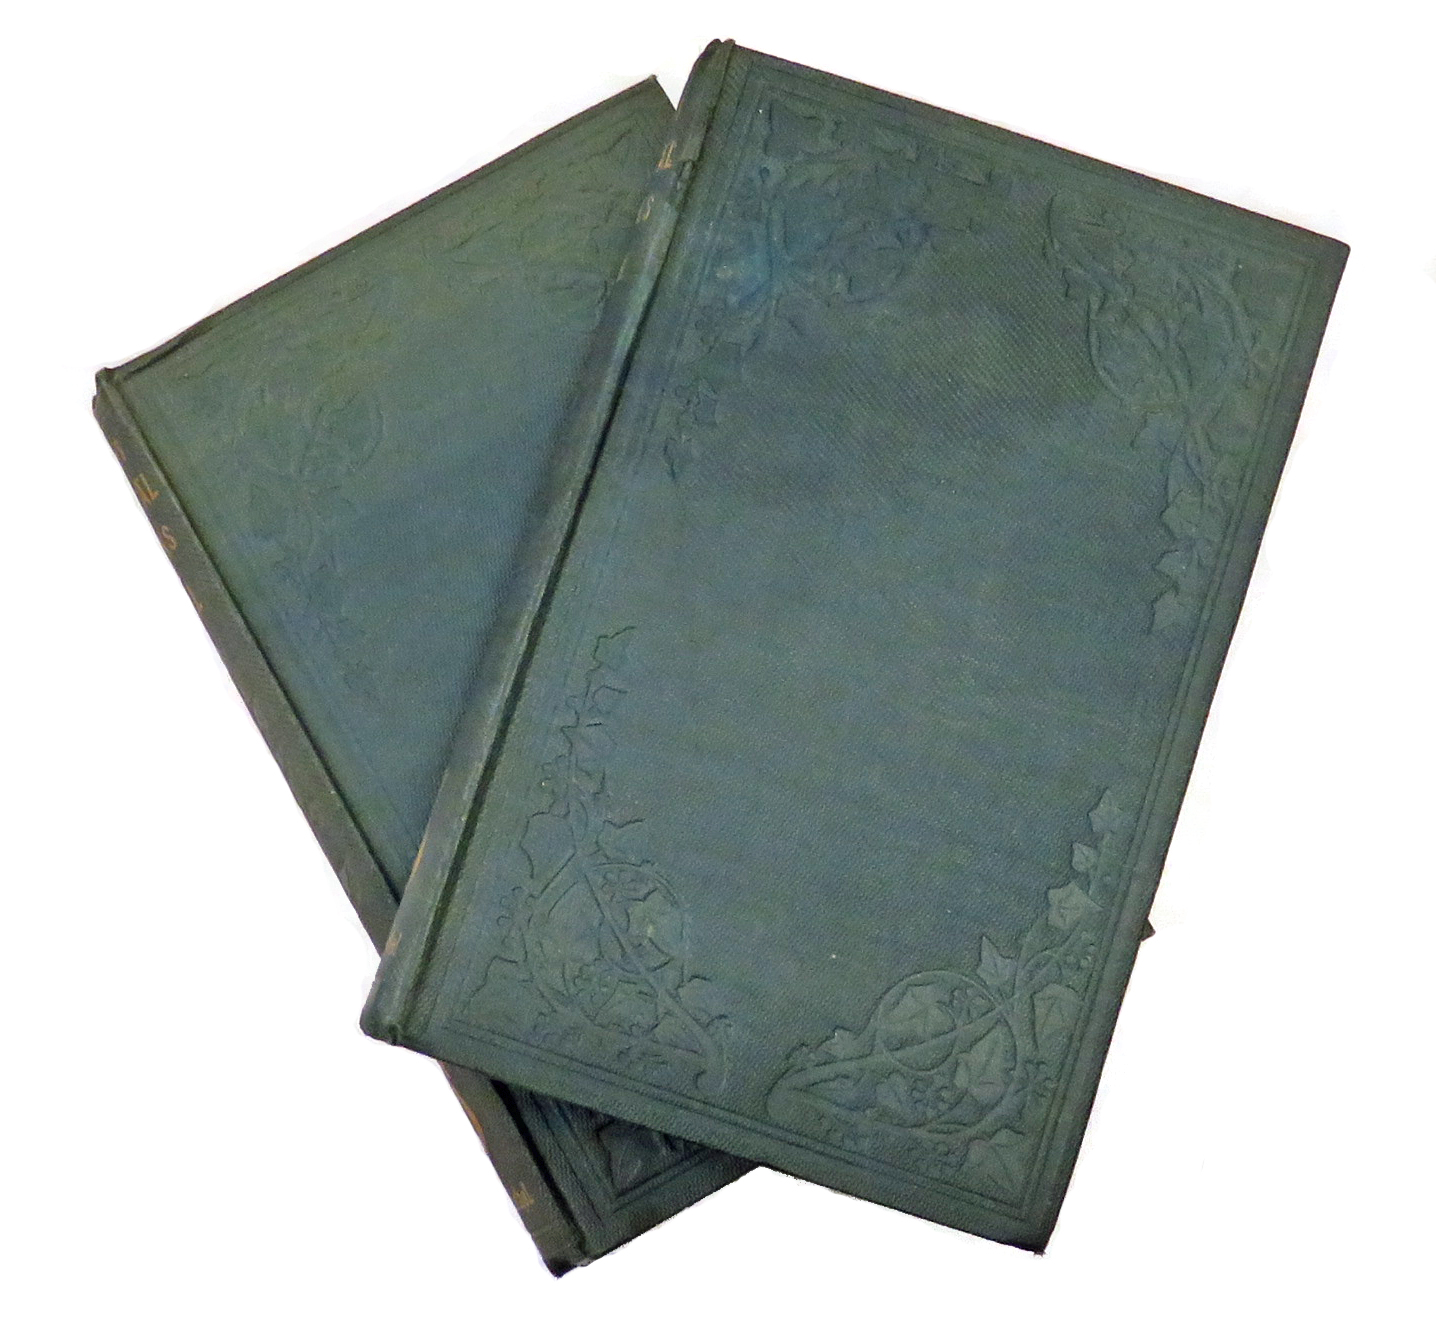 Milton's Poetical Works. With Life, Critical Dissertation, and Explanatory Notes. In two volumes.